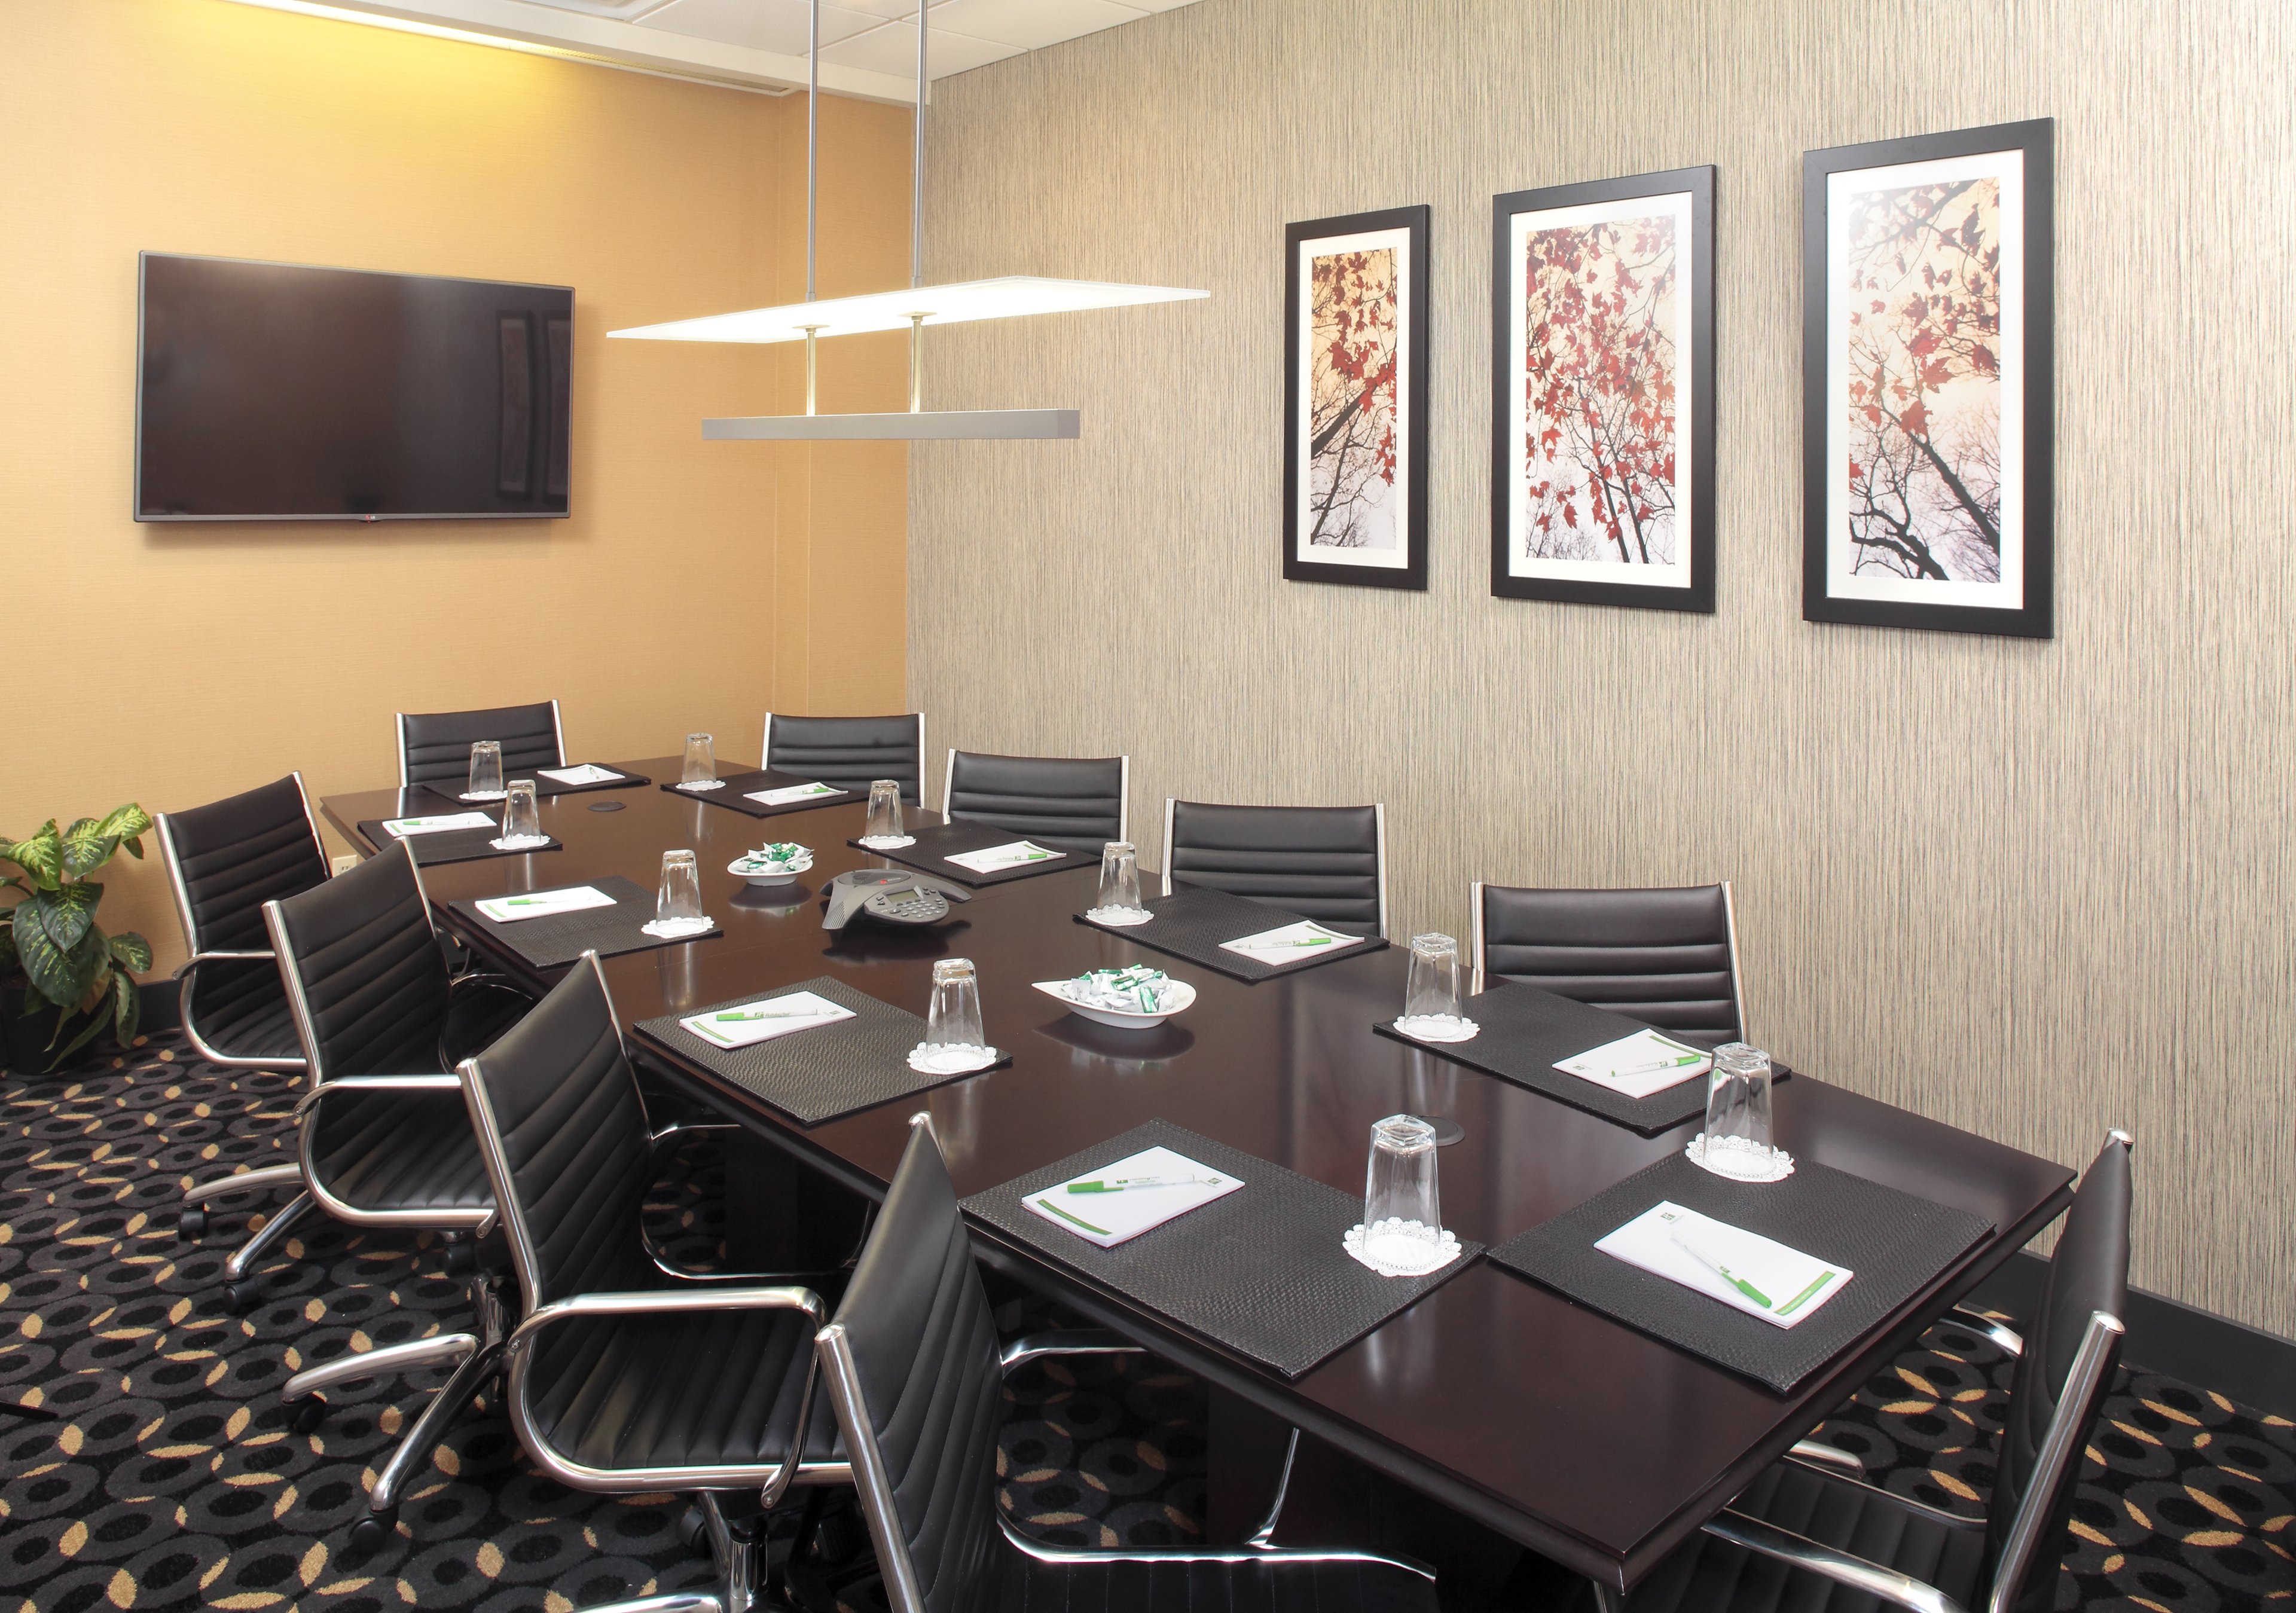 7 Meeting rooms and over 4000 sq ft of meeting space